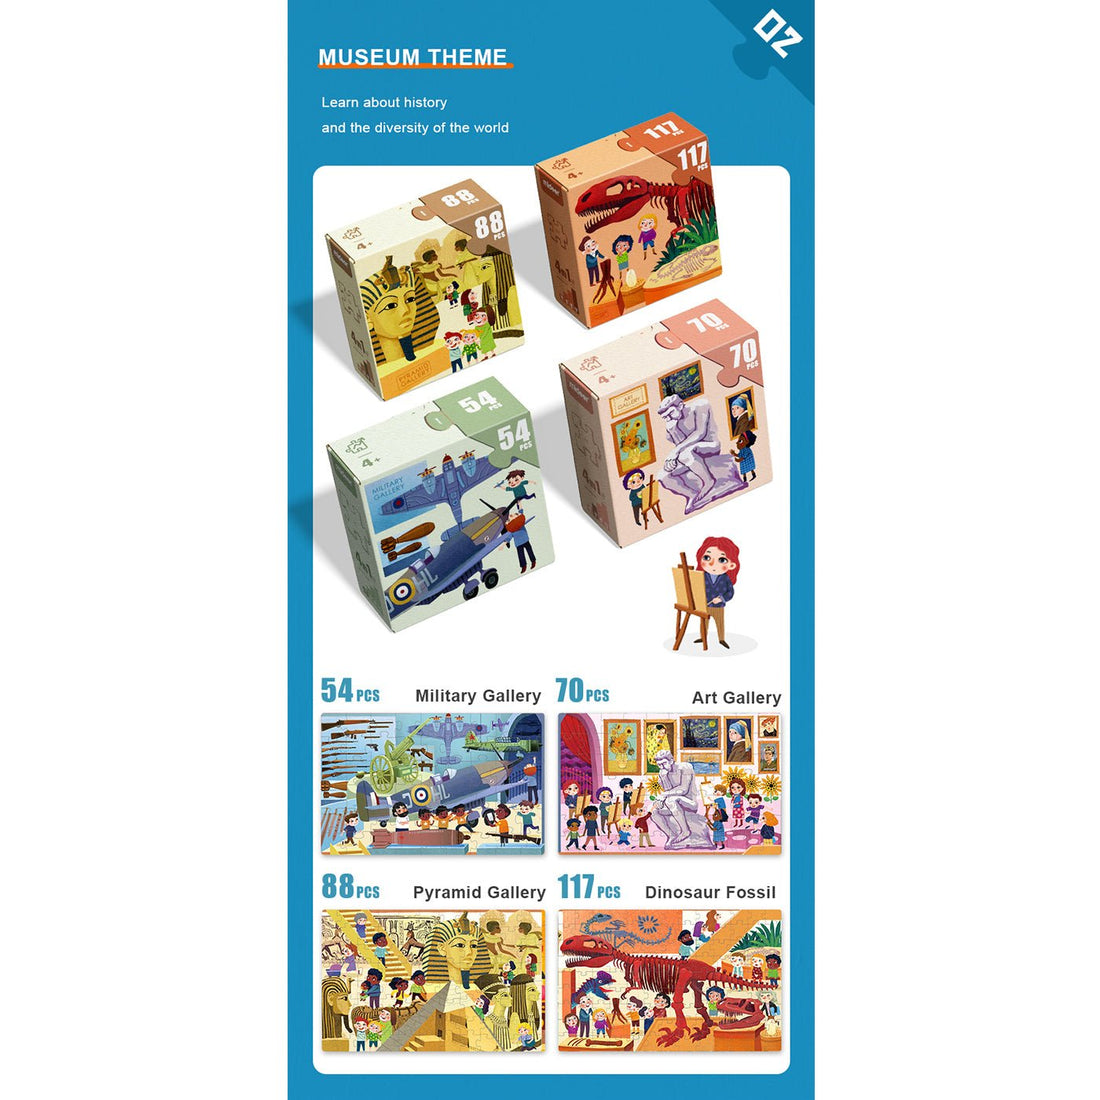 4 In 1 My Visit To The Museum Puzzle Set 329pcs - 0cm